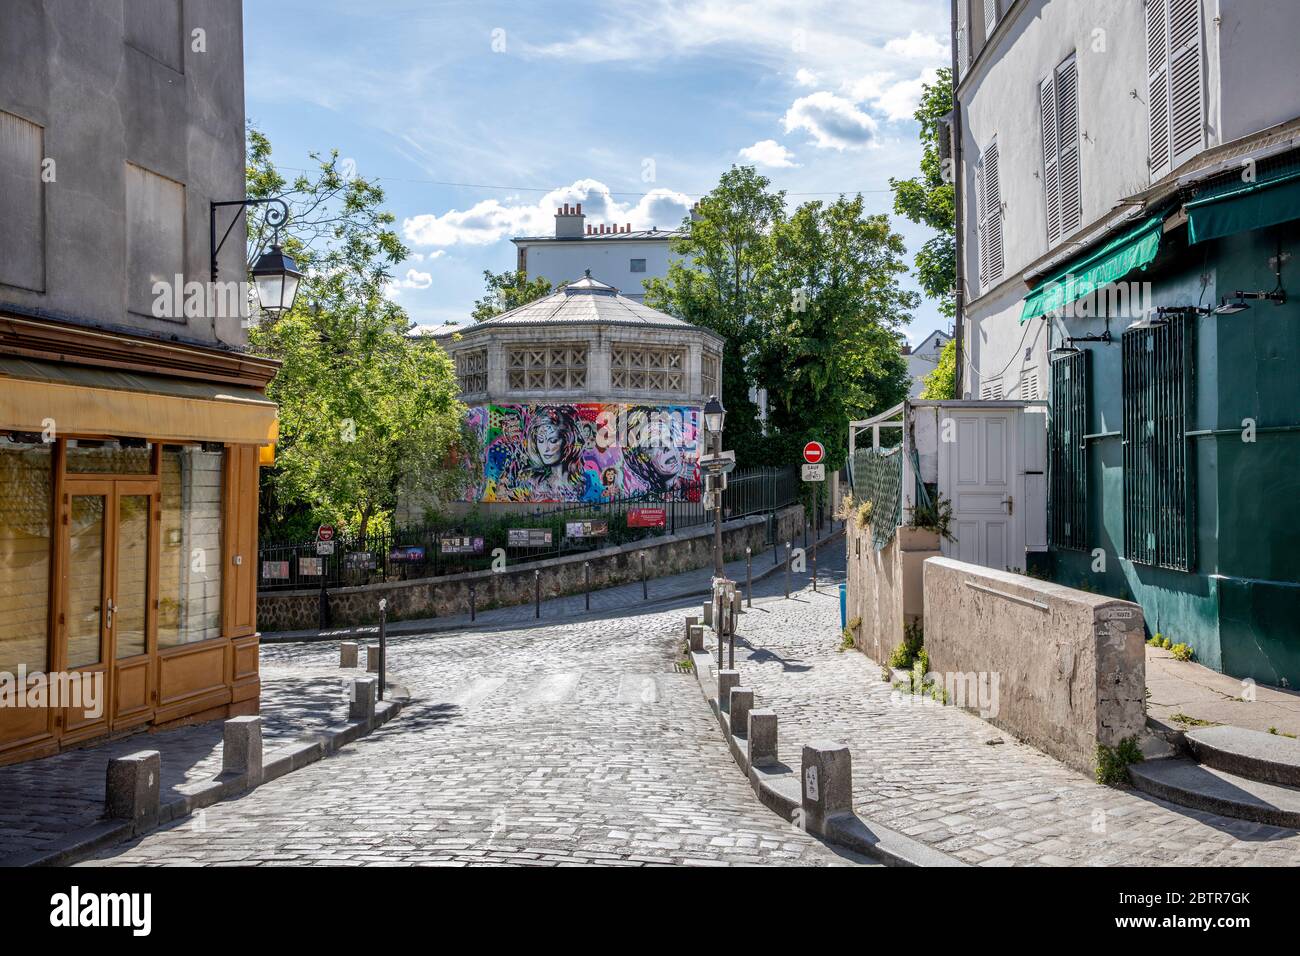 Paris, France - May 20, 2020: Typical street in Montmartre neighborhood in Paris during lockdown because of covid-19 Stock Photo